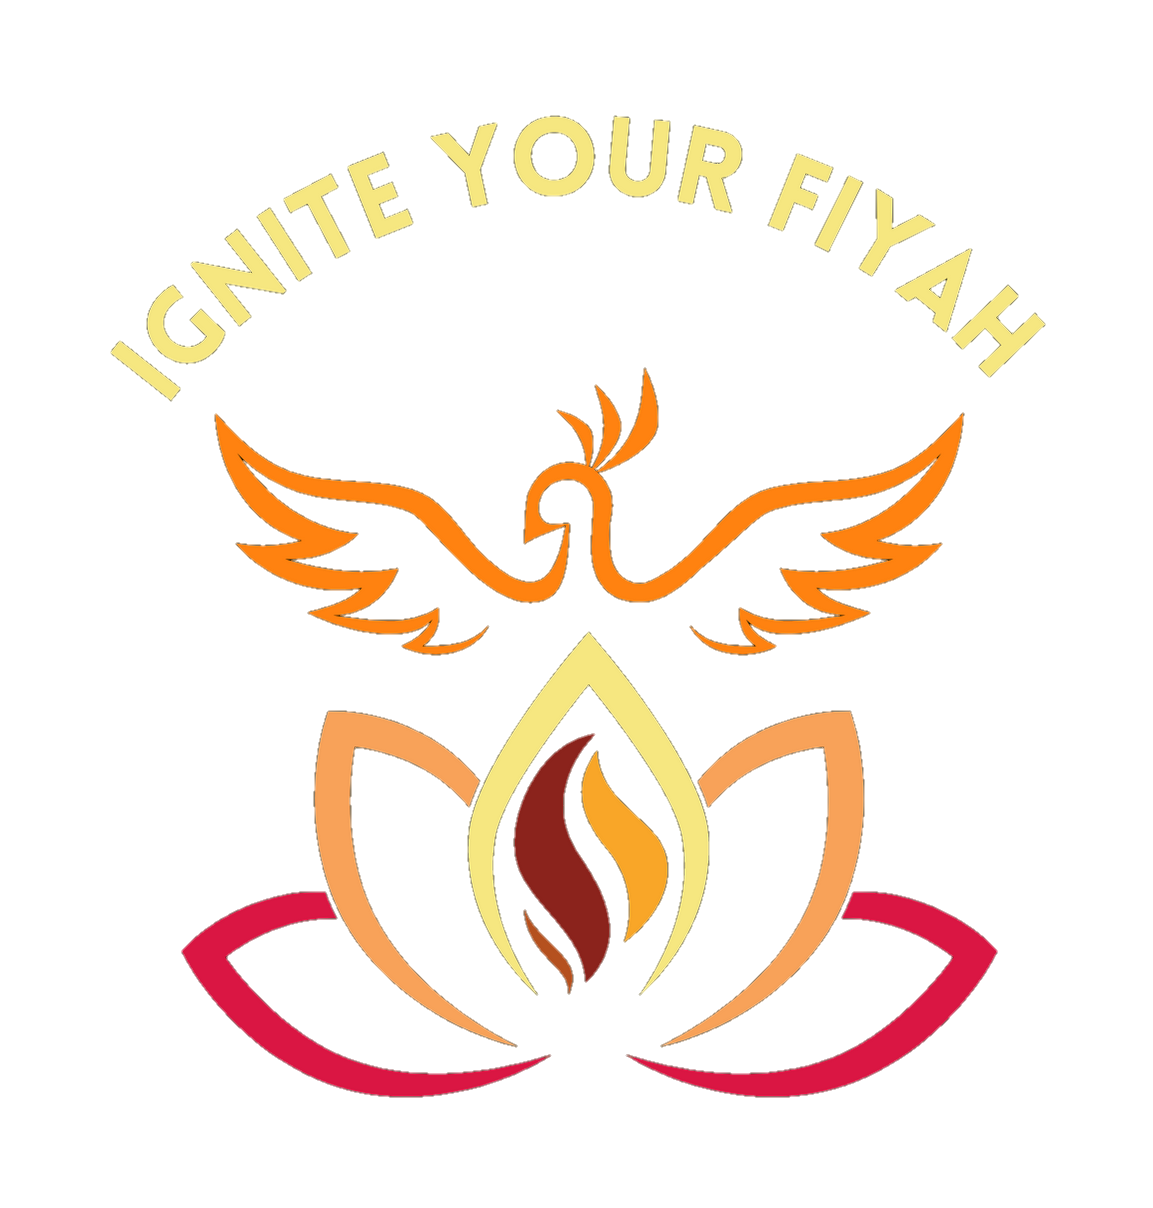 IGNITE YOUR FIYAH® by Jessica Phoenix